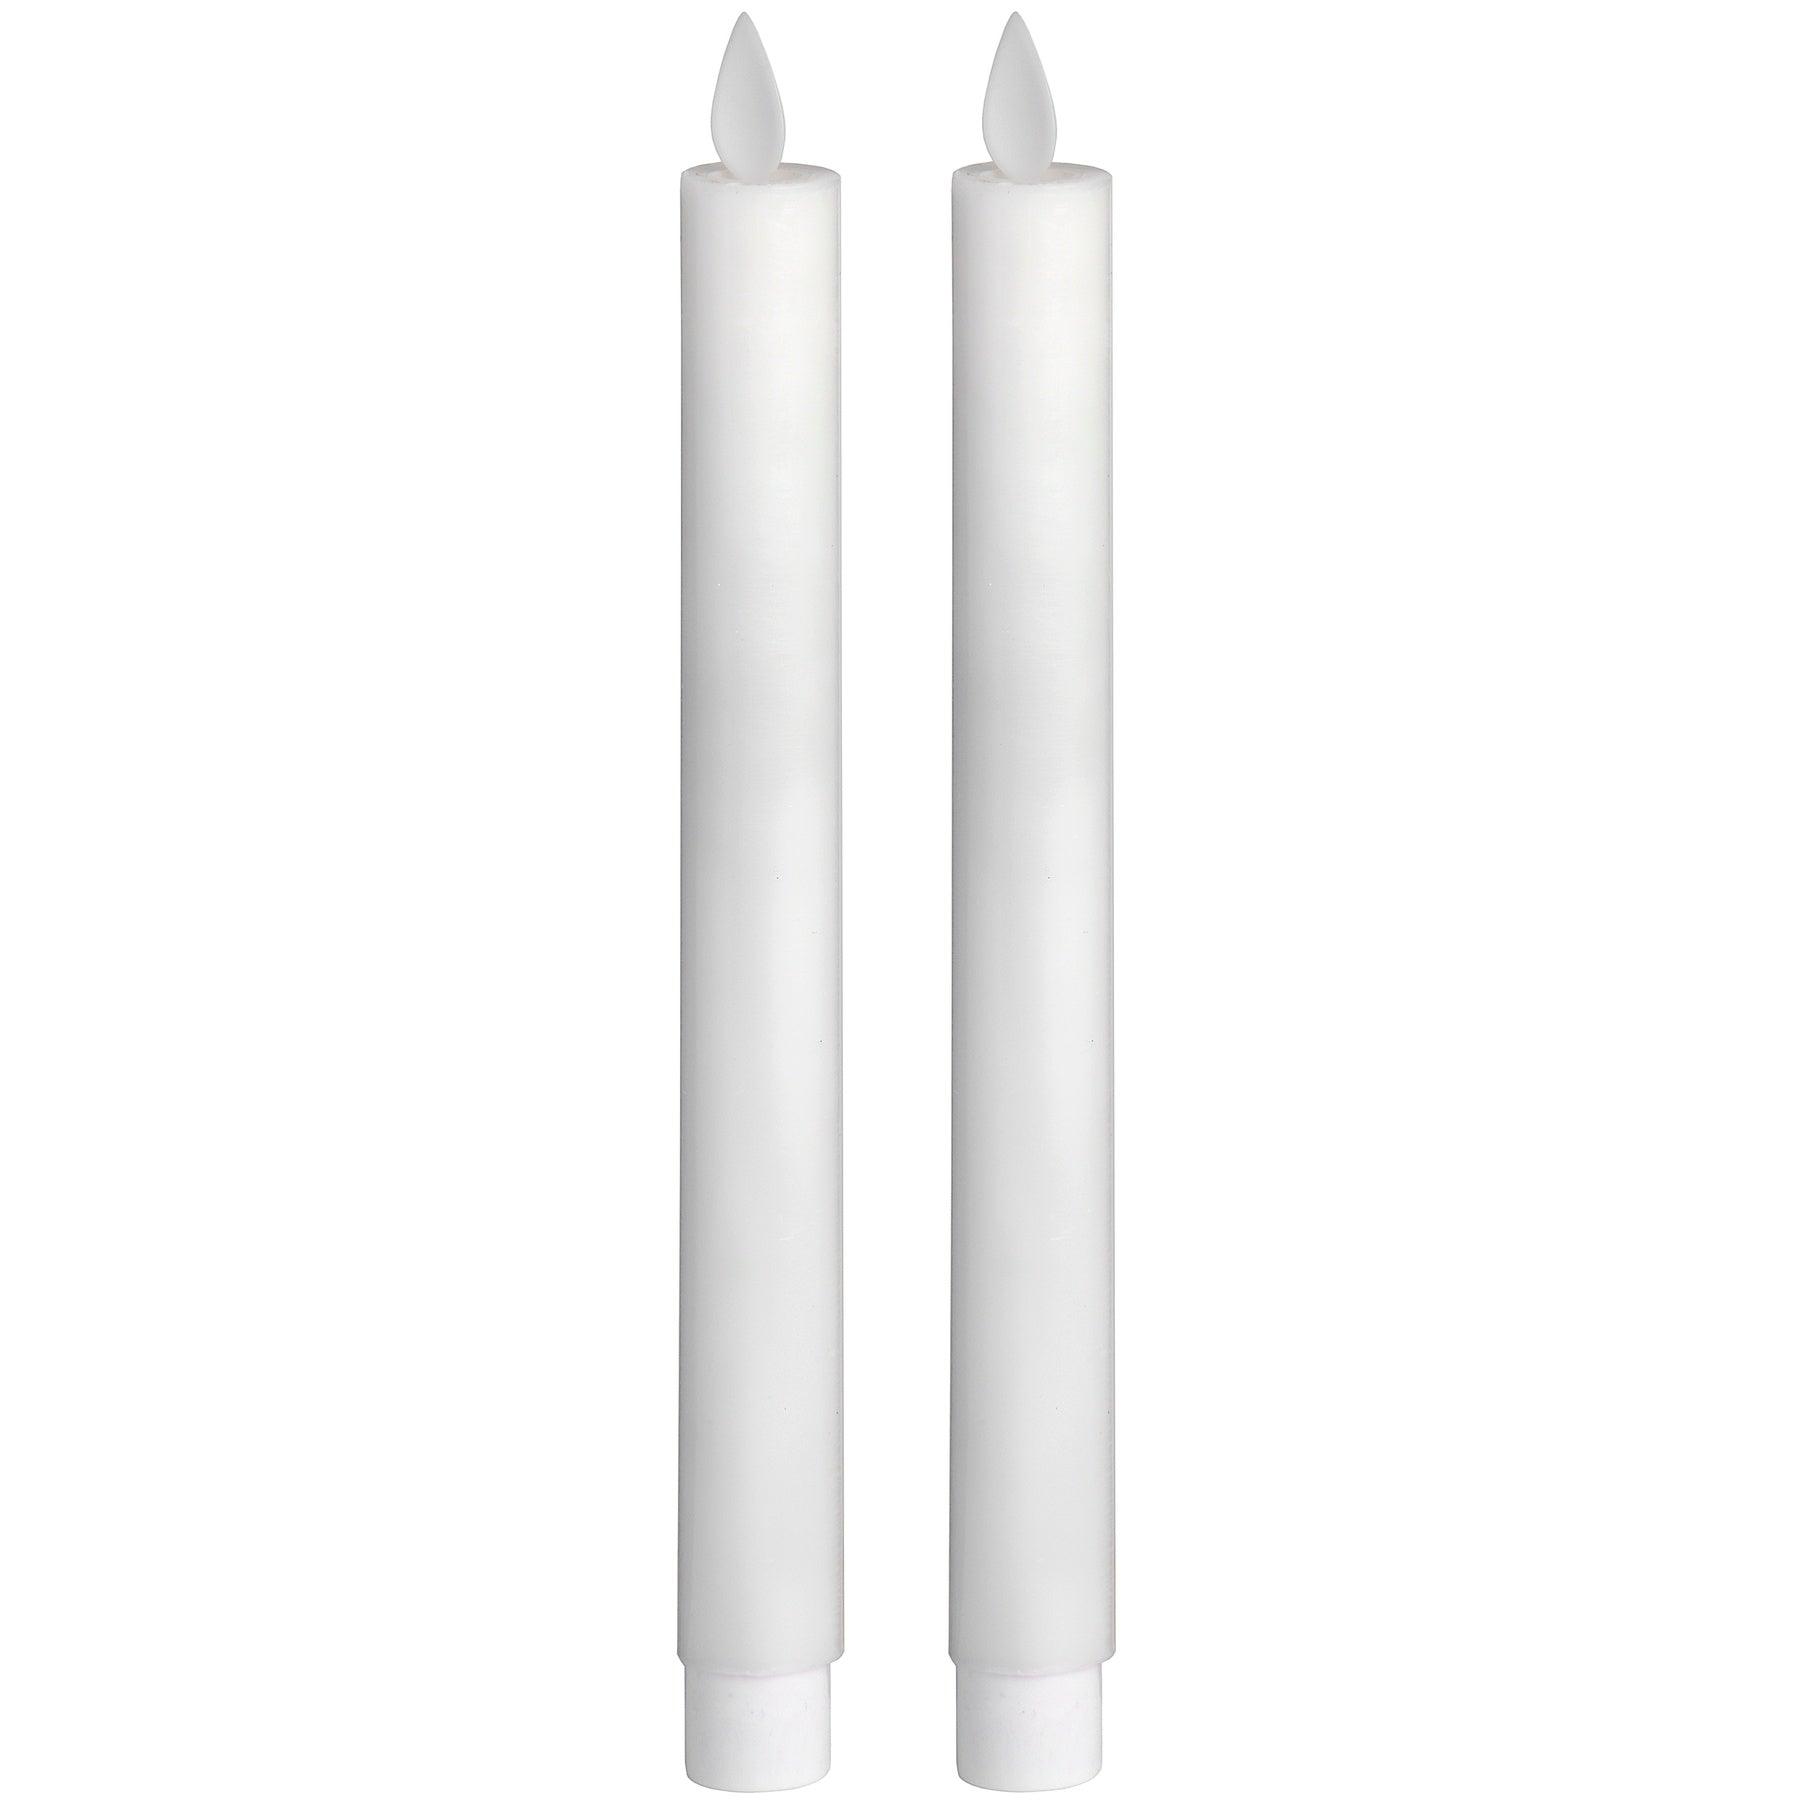 View Pair Of White Luxe Flickering Flame LED Wax Dinner Candles information